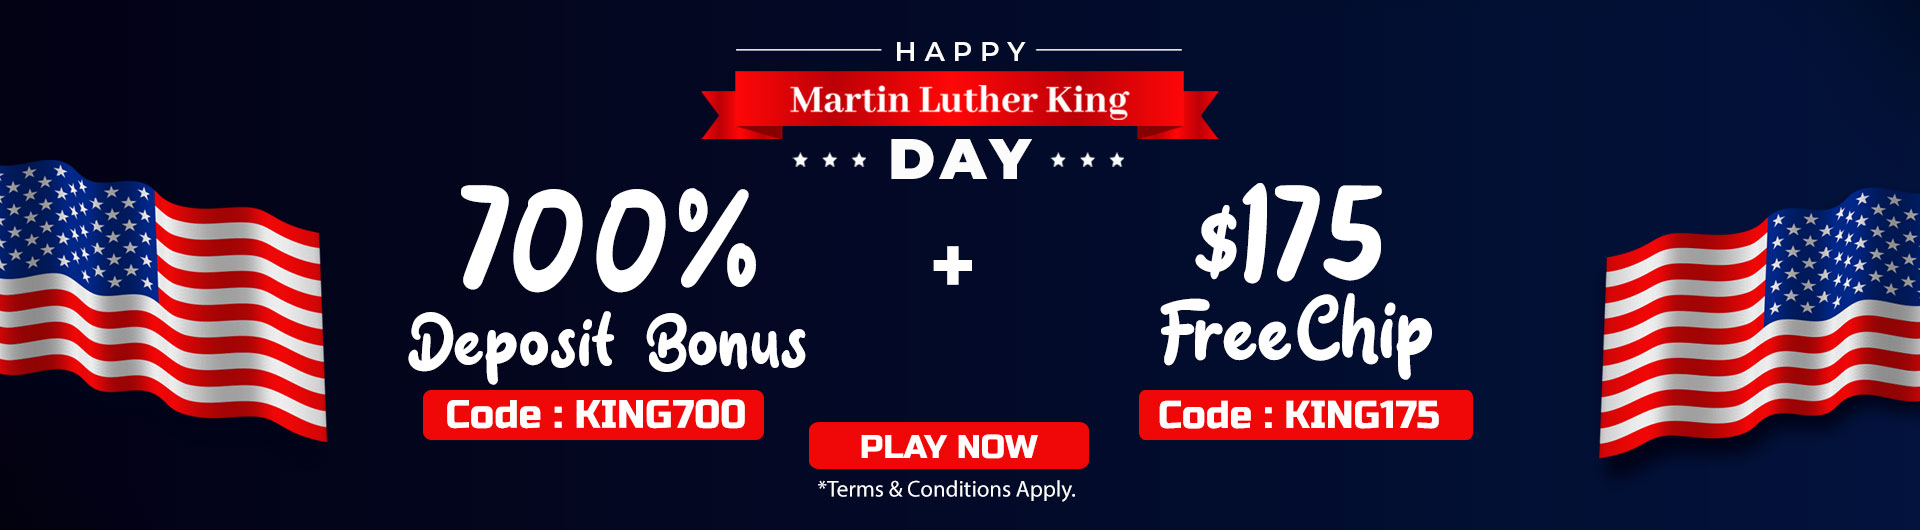 S7_Happy-martin-luther-king